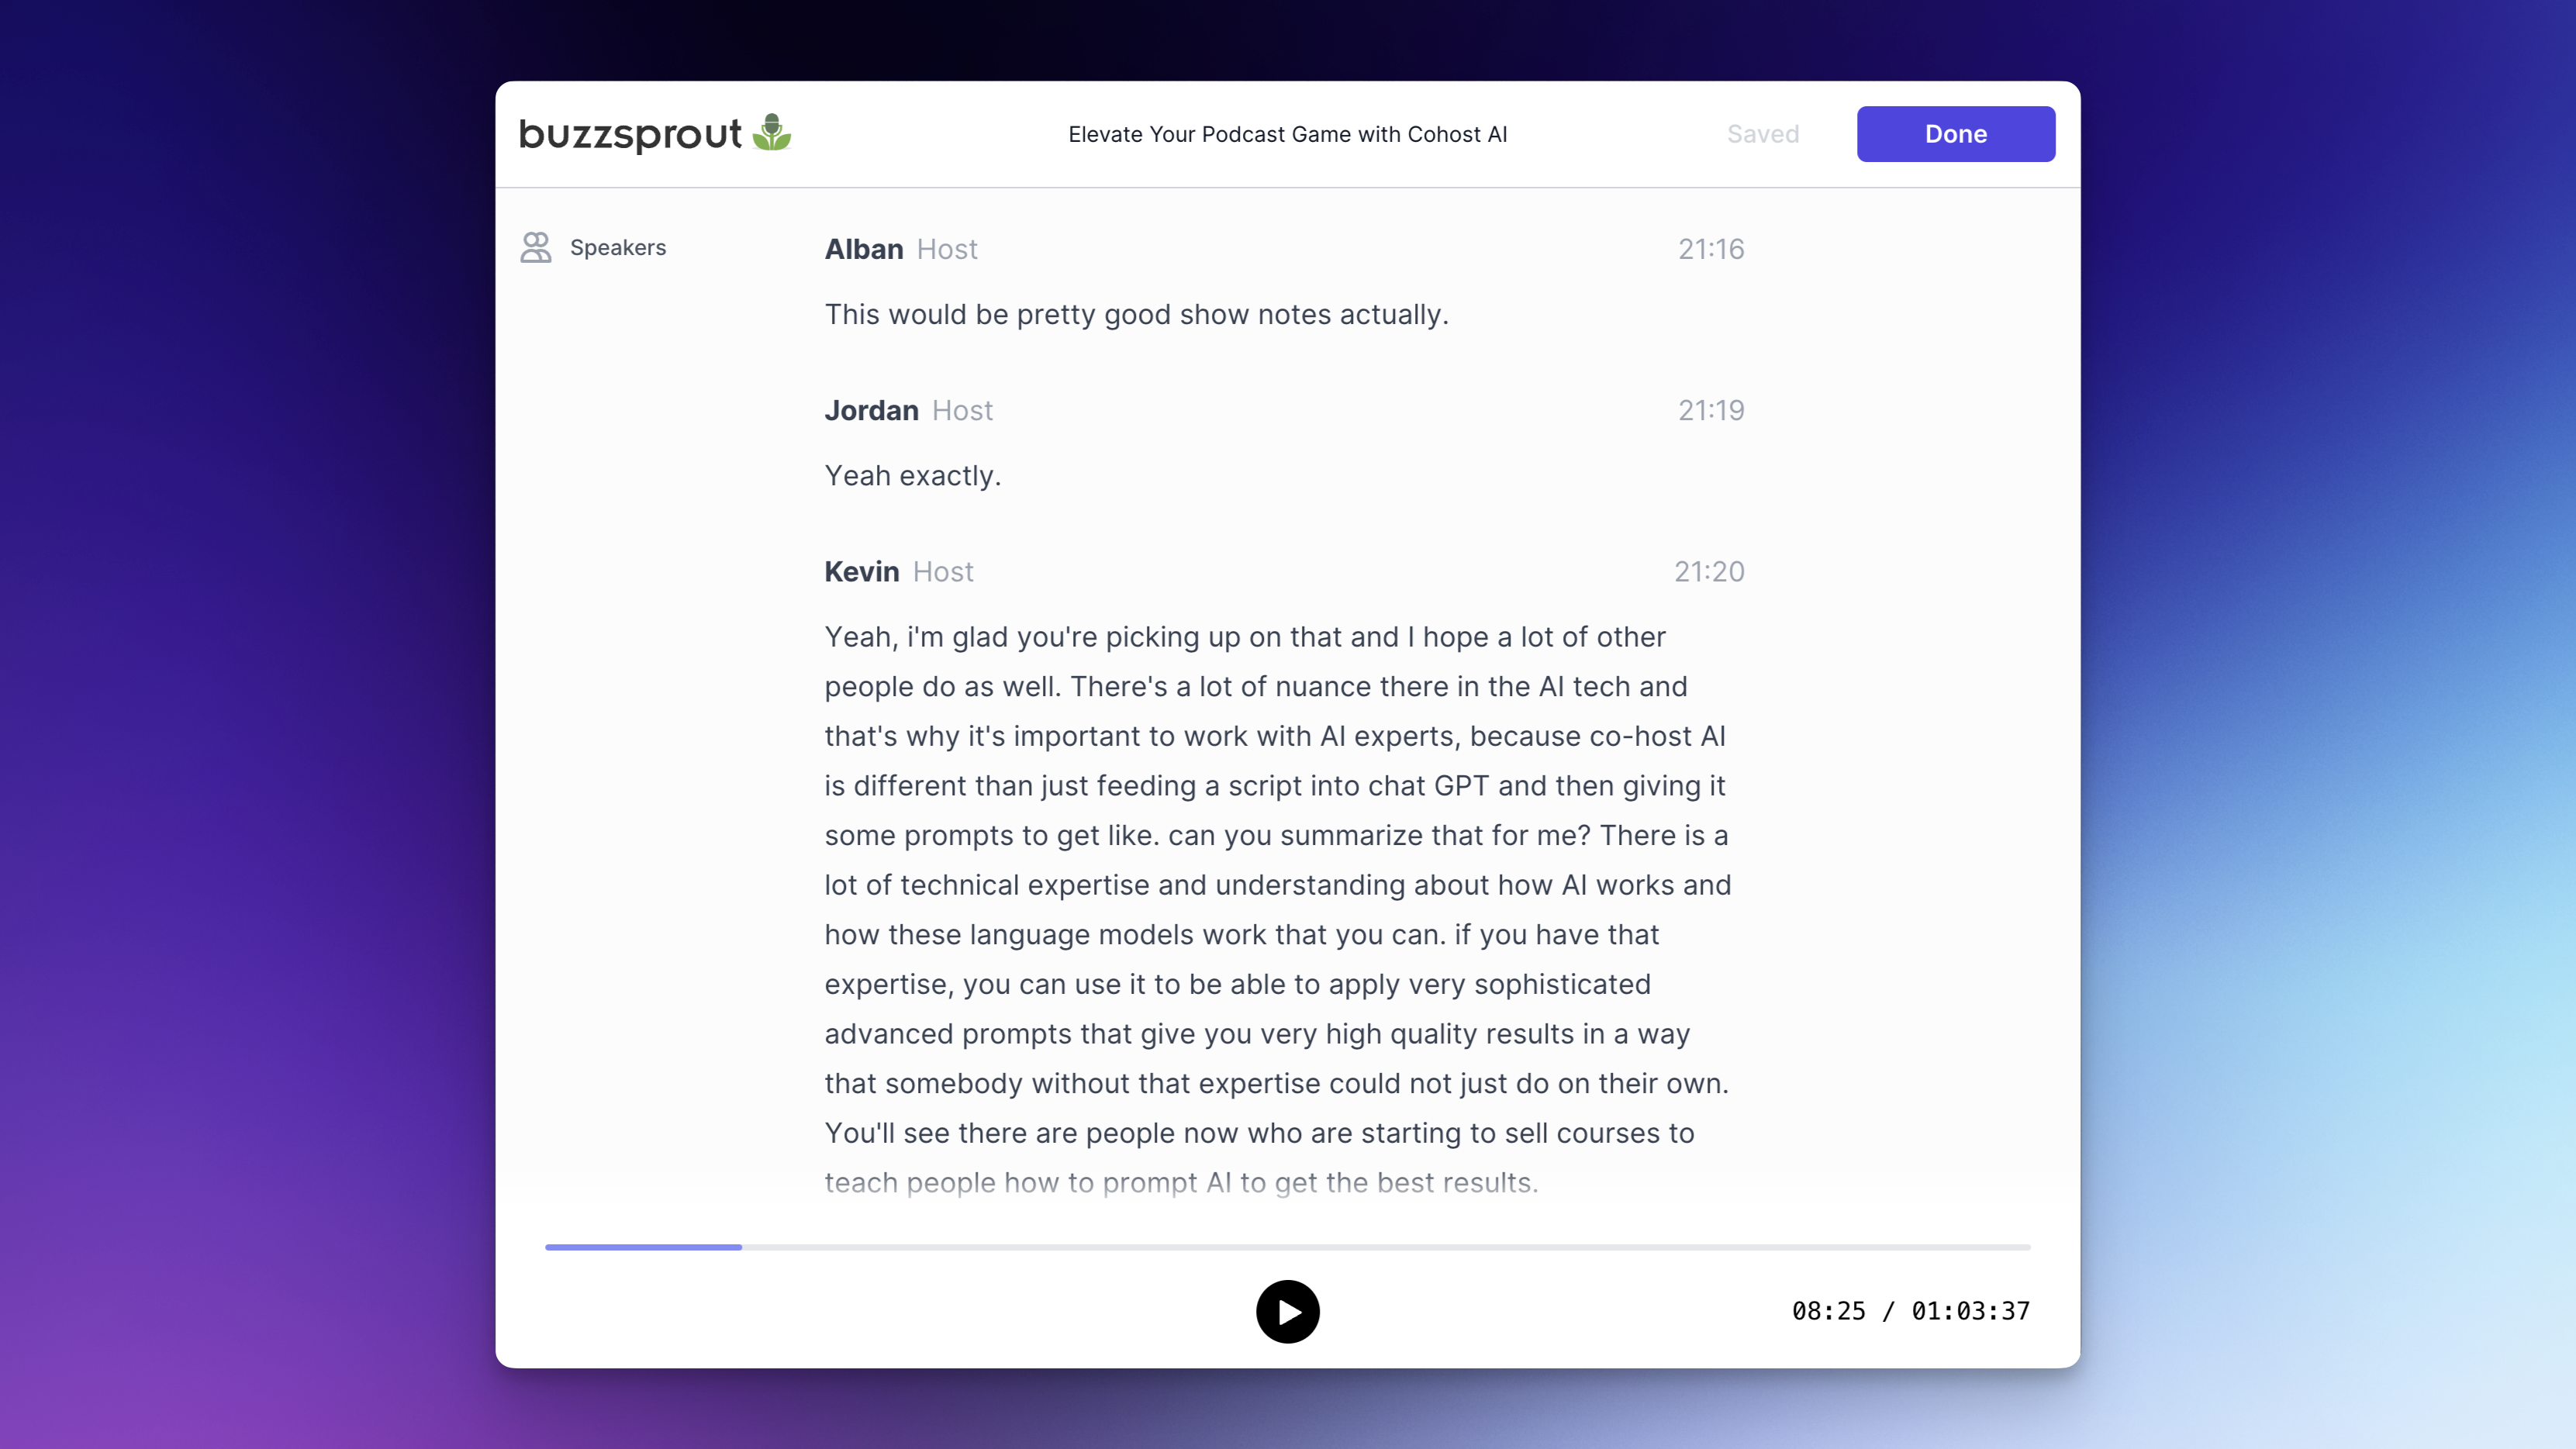 Improved transcript editor for Buzzsprout